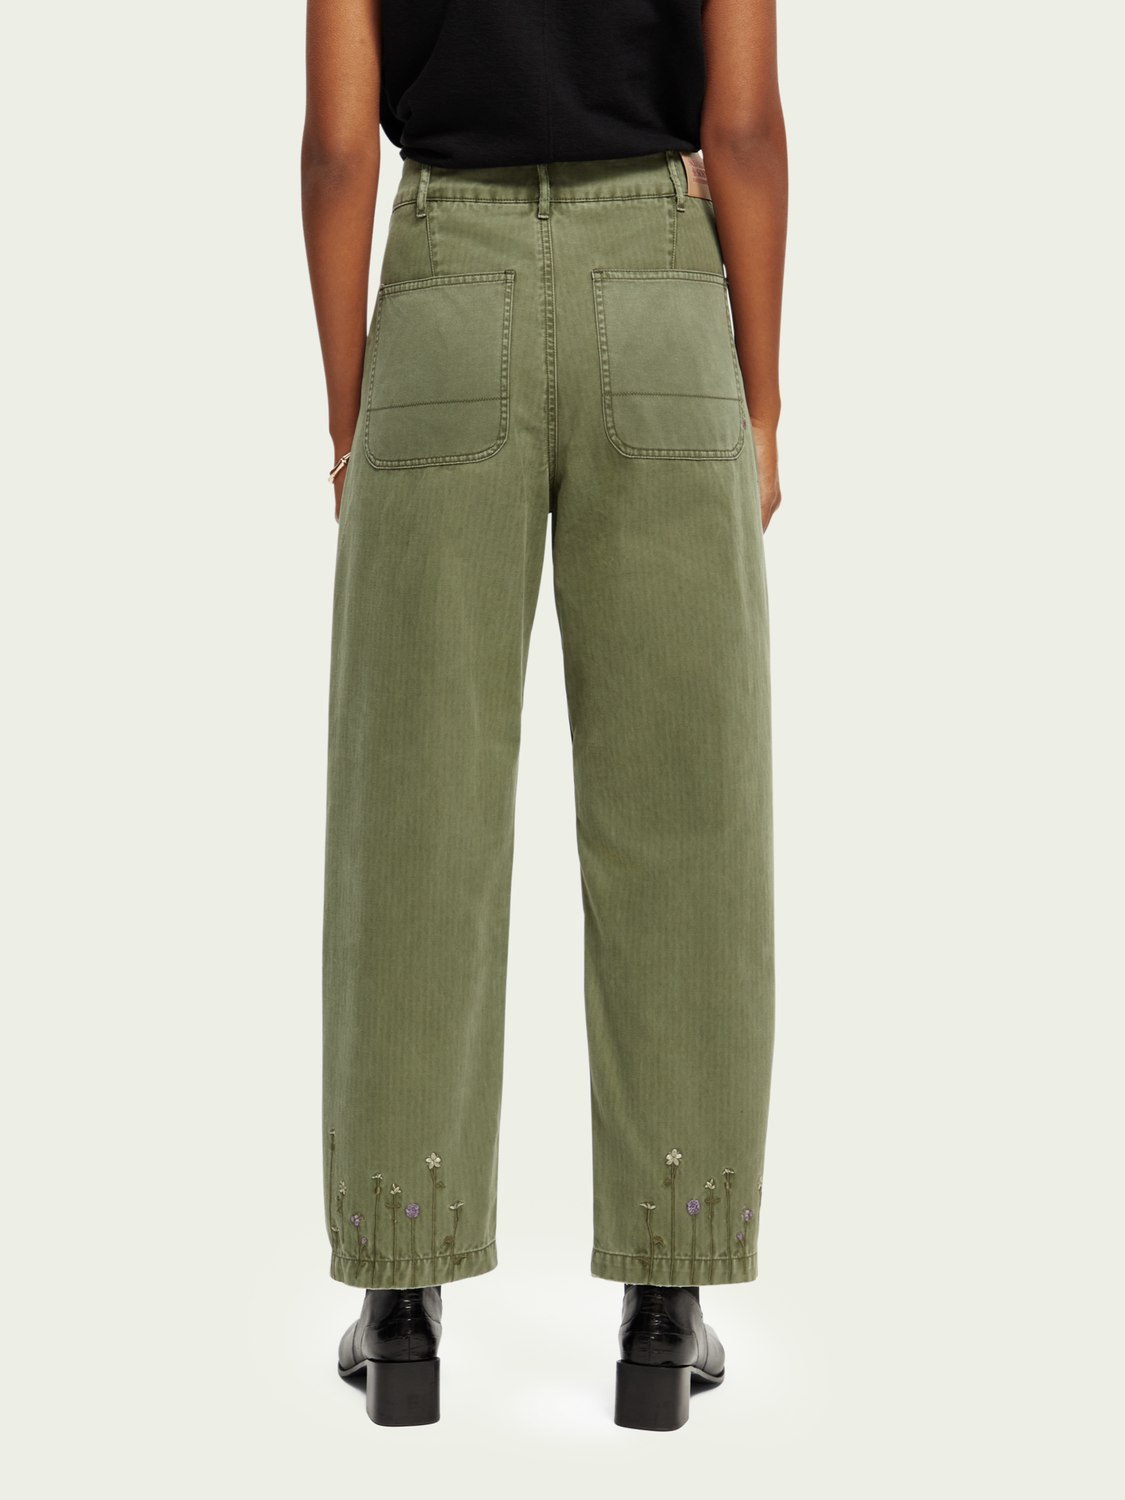 The Utility Chino